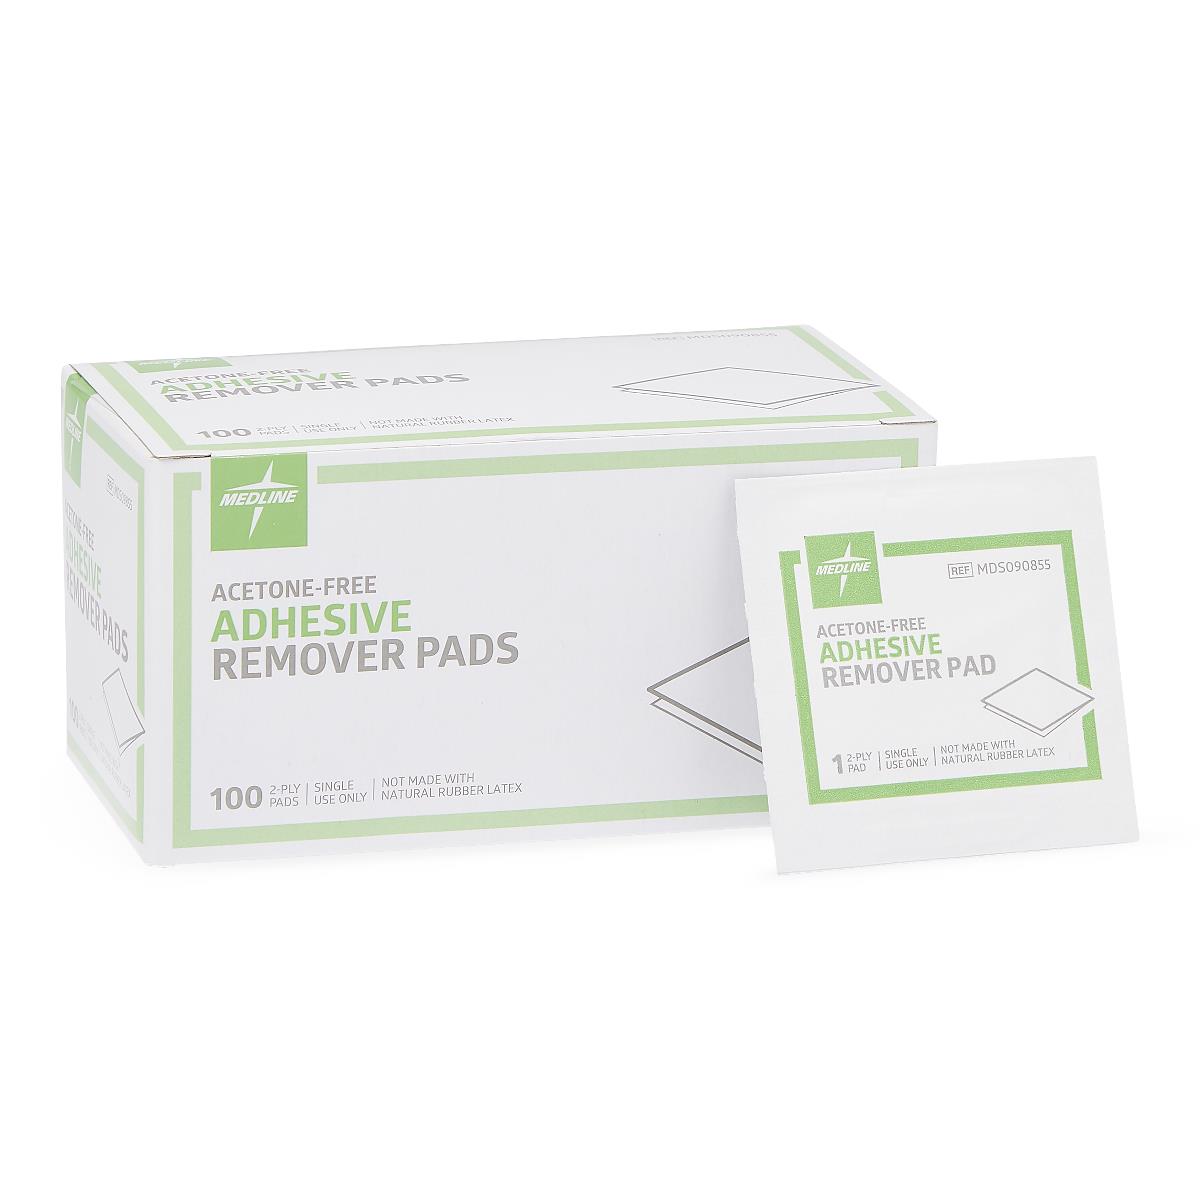 Medline Adhesive Remover Pads 100/bx MDS090855H